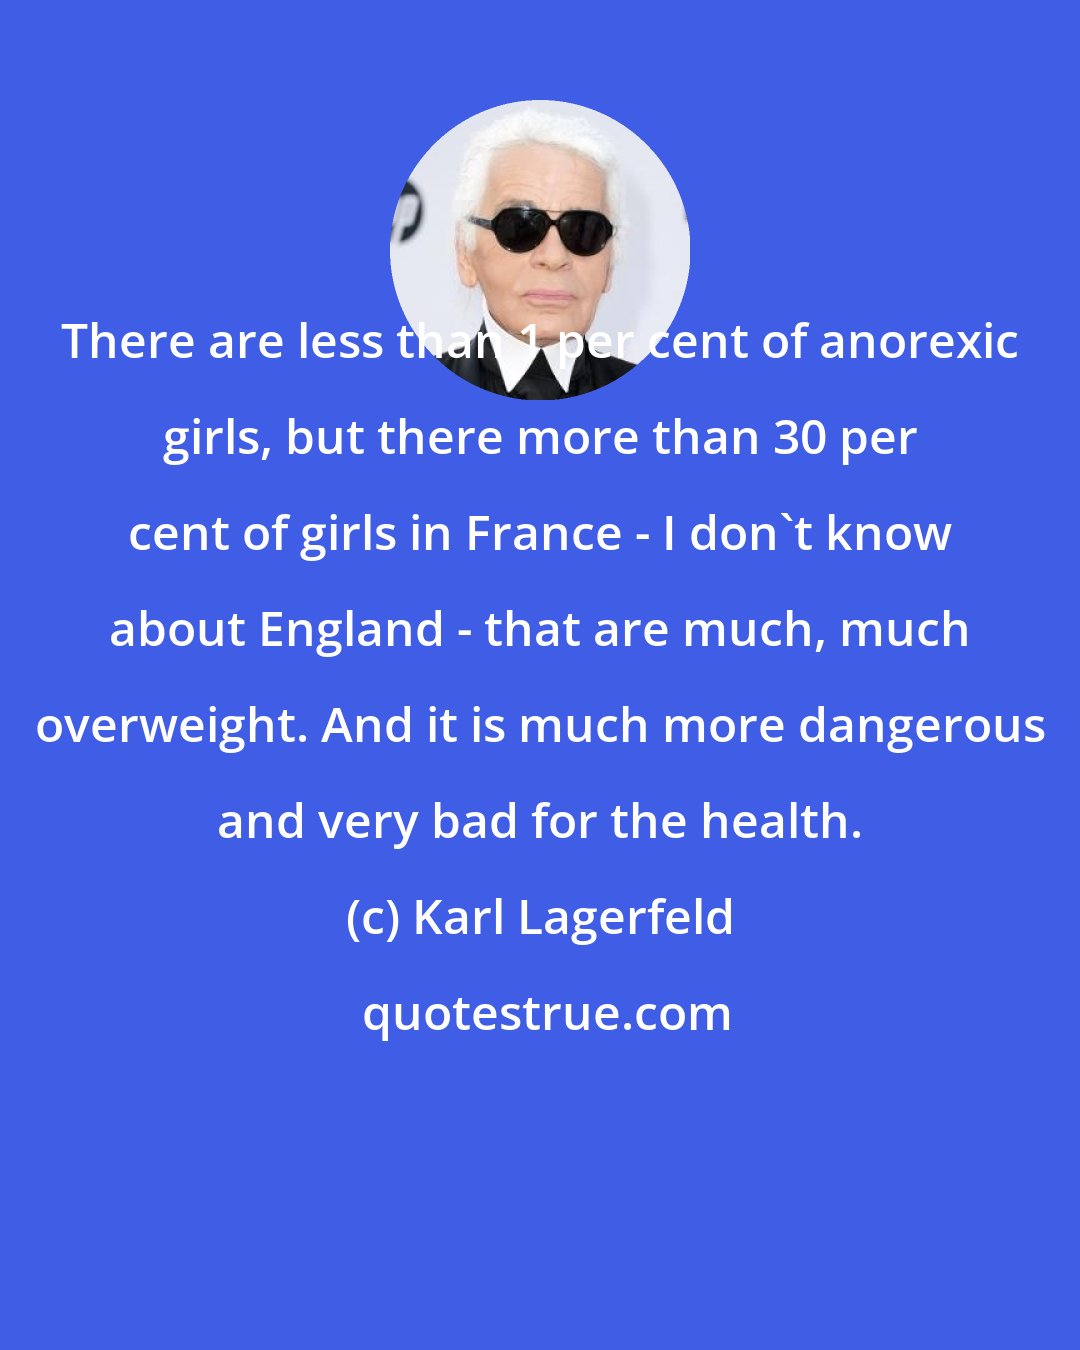 Karl Lagerfeld: There are less than 1 per cent of anorexic girls, but there more than 30 per cent of girls in France - I don't know about England - that are much, much overweight. And it is much more dangerous and very bad for the health.